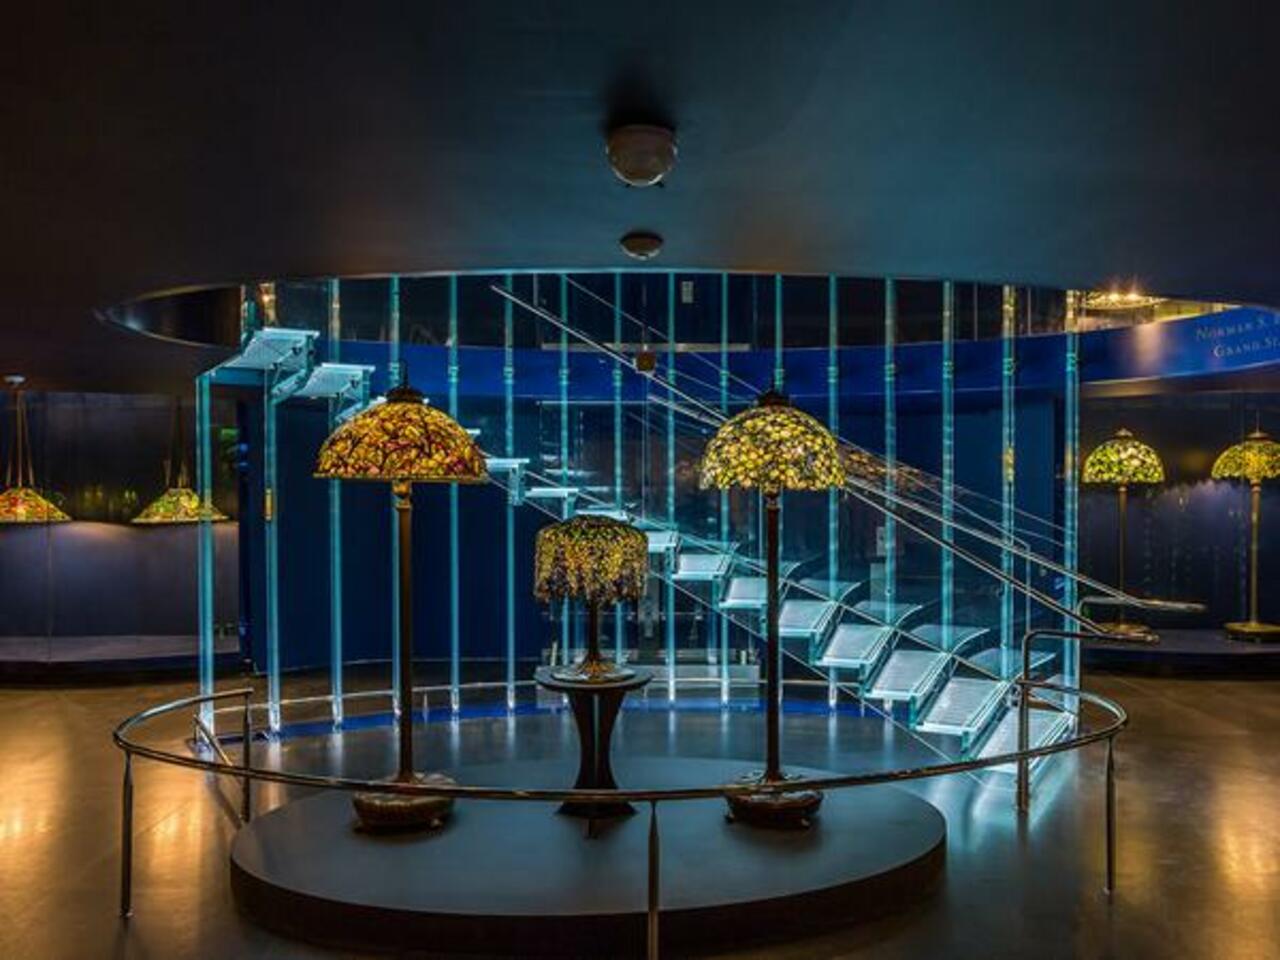 RT @glassonweb: Striking #glass #staircase unveiled at New York Historical Society https://www.glassonweb.com/news/striking-glass-staircase-unveiled-new-york-historical-society https://t.co/yuZwv0U1jn